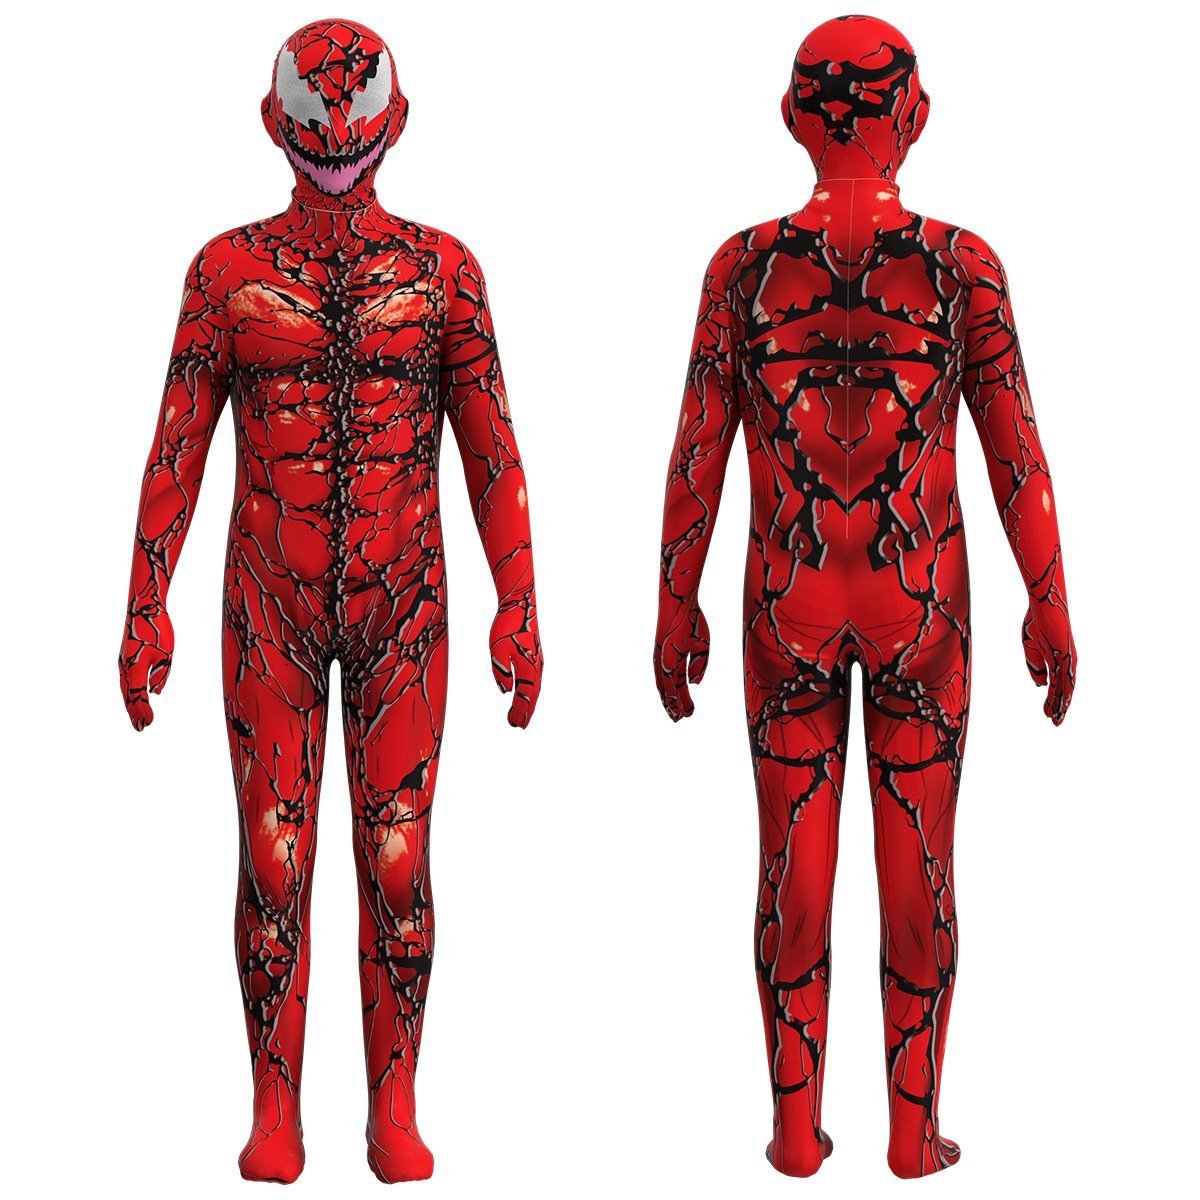 Venom Let There Be Carnage Halloween Costumes Kids Bodysuit jumpsuits